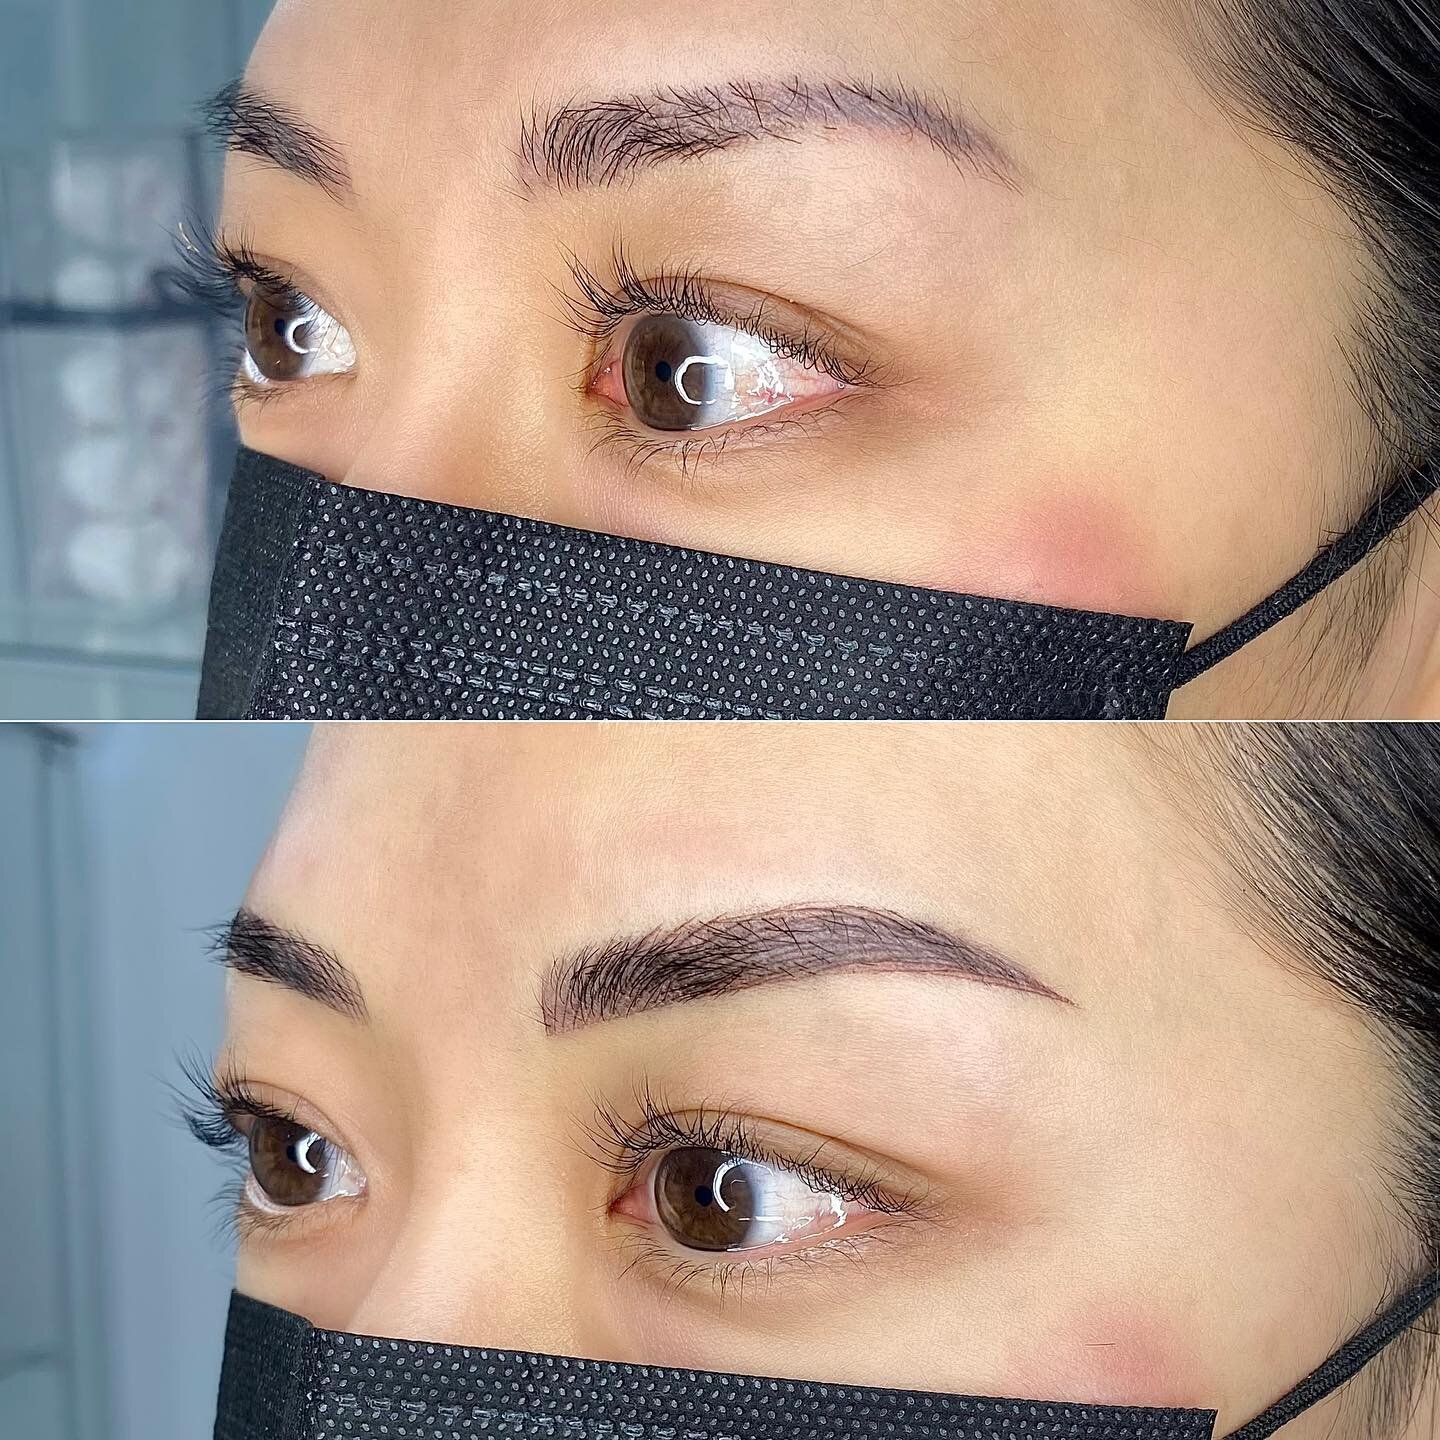 Covering up 7 years of old micro-bladed brows with nano brow 😍

Technique: Nano shading 
Colour: Umbra 
Price: $400 (including complementary 8 weeks touch up)
Longevity: Up to 1.5 - 2 years

#calgarybrows #yycbrows #yycnanobrows #yycmicroblading #br